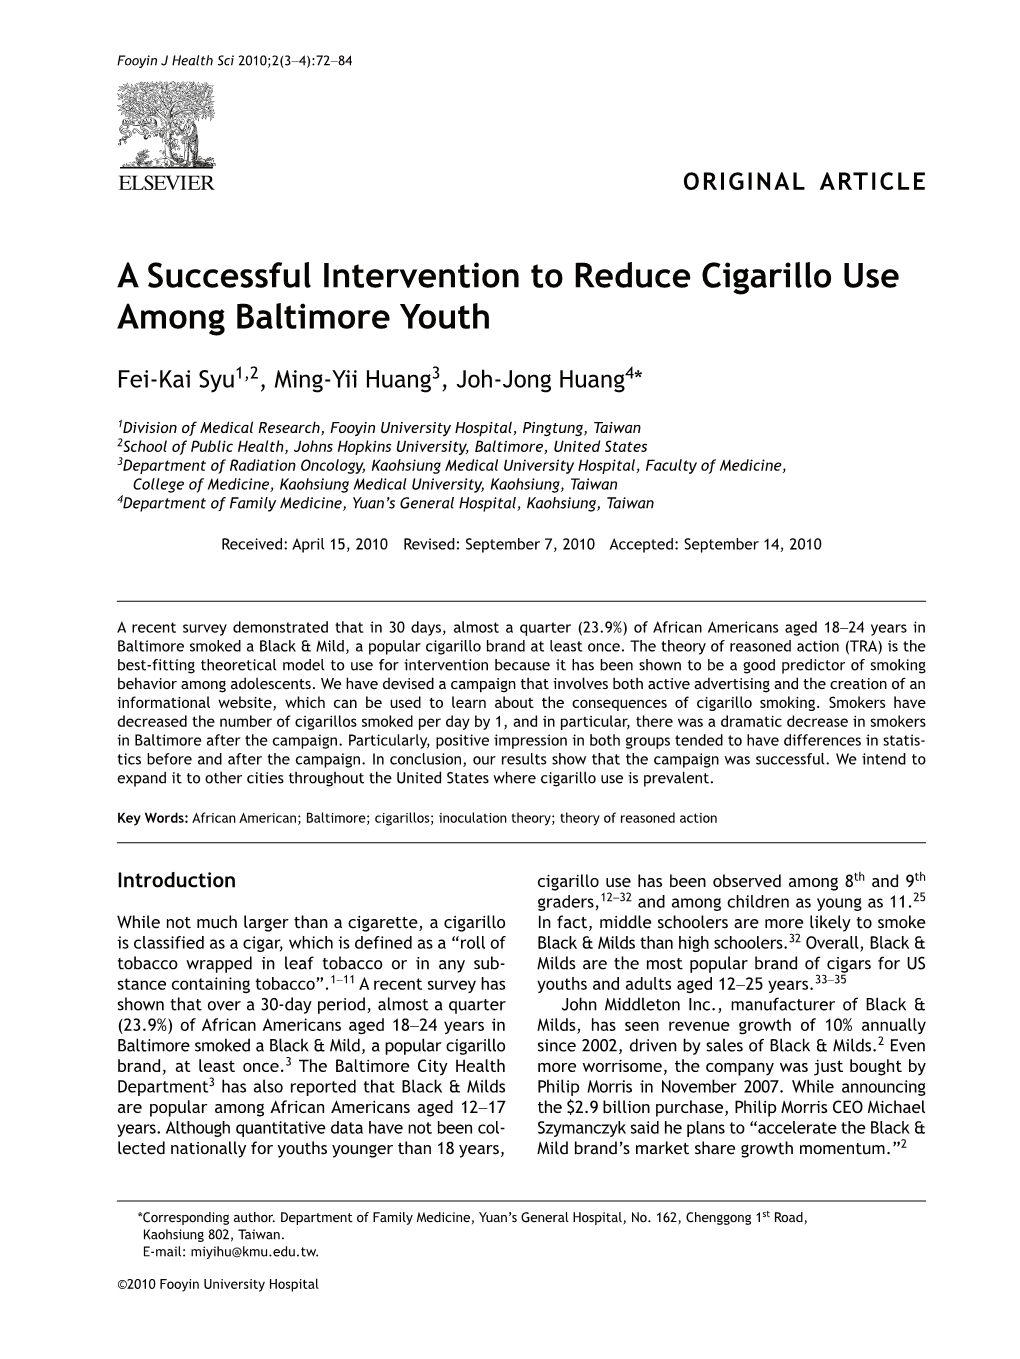 A Successful Intervention to Reduce Cigarillo Use Among Baltimore Youth